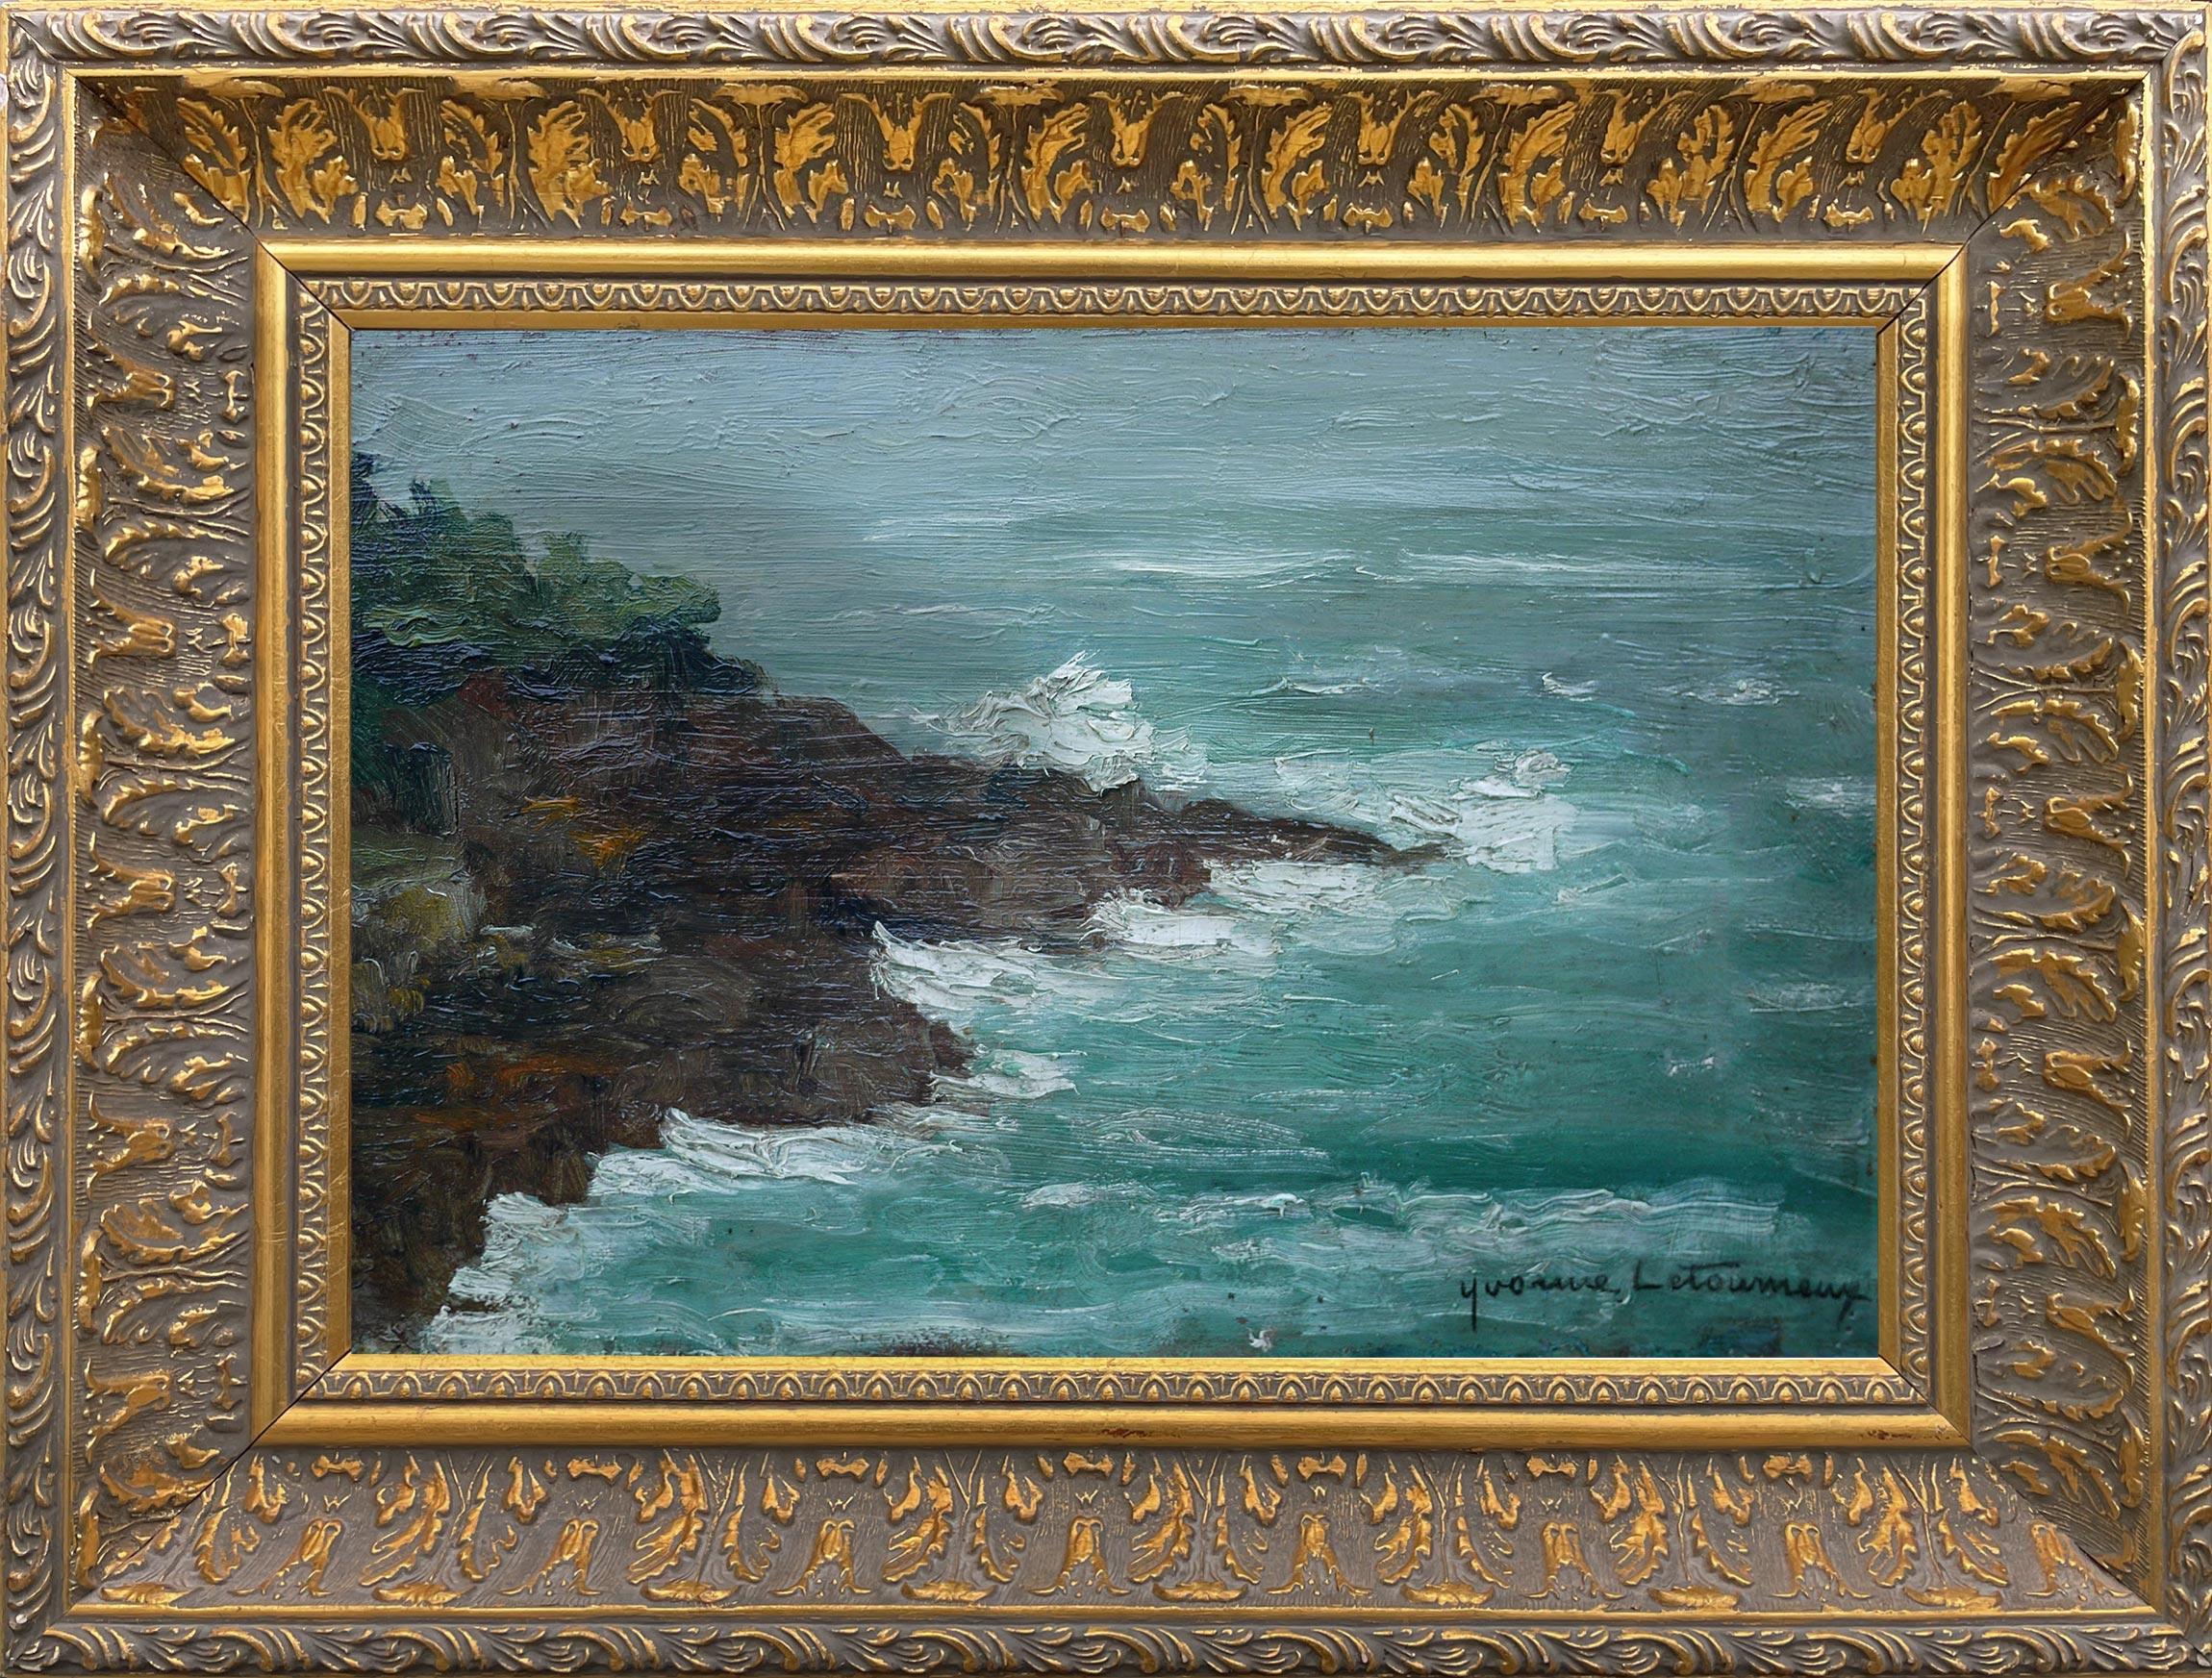 Letourneux Yvonne – Storm in Provence.

Measures: 22cm x 33cm - unframed
34cm x 45cm - with frame.

Oil on canvas - 1930s.

The stormy sea, the leaden color of the water, the high waves and the crests crash against the rocks, forming a white